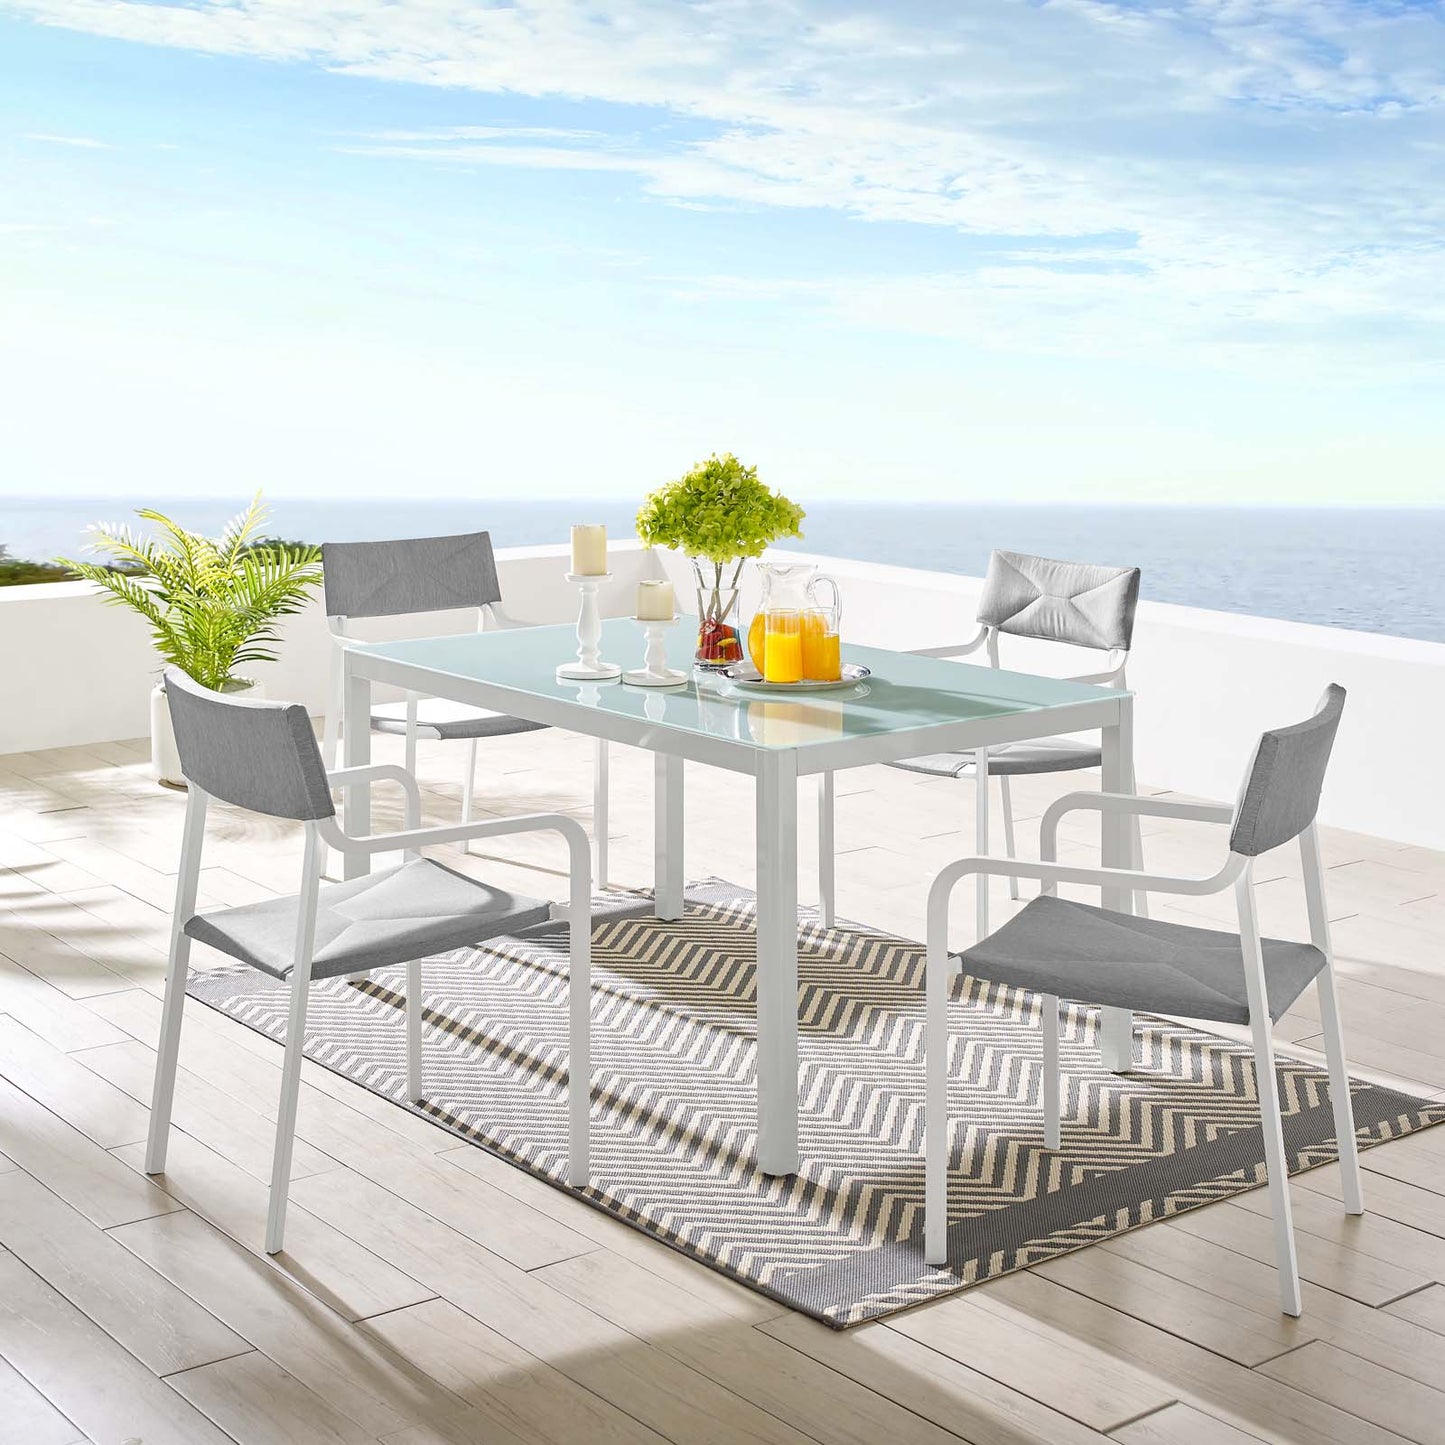 Raleigh 5 Piece Outdoor Patio Aluminum Dining Set White Gray EEI-3796-WHI-GRY